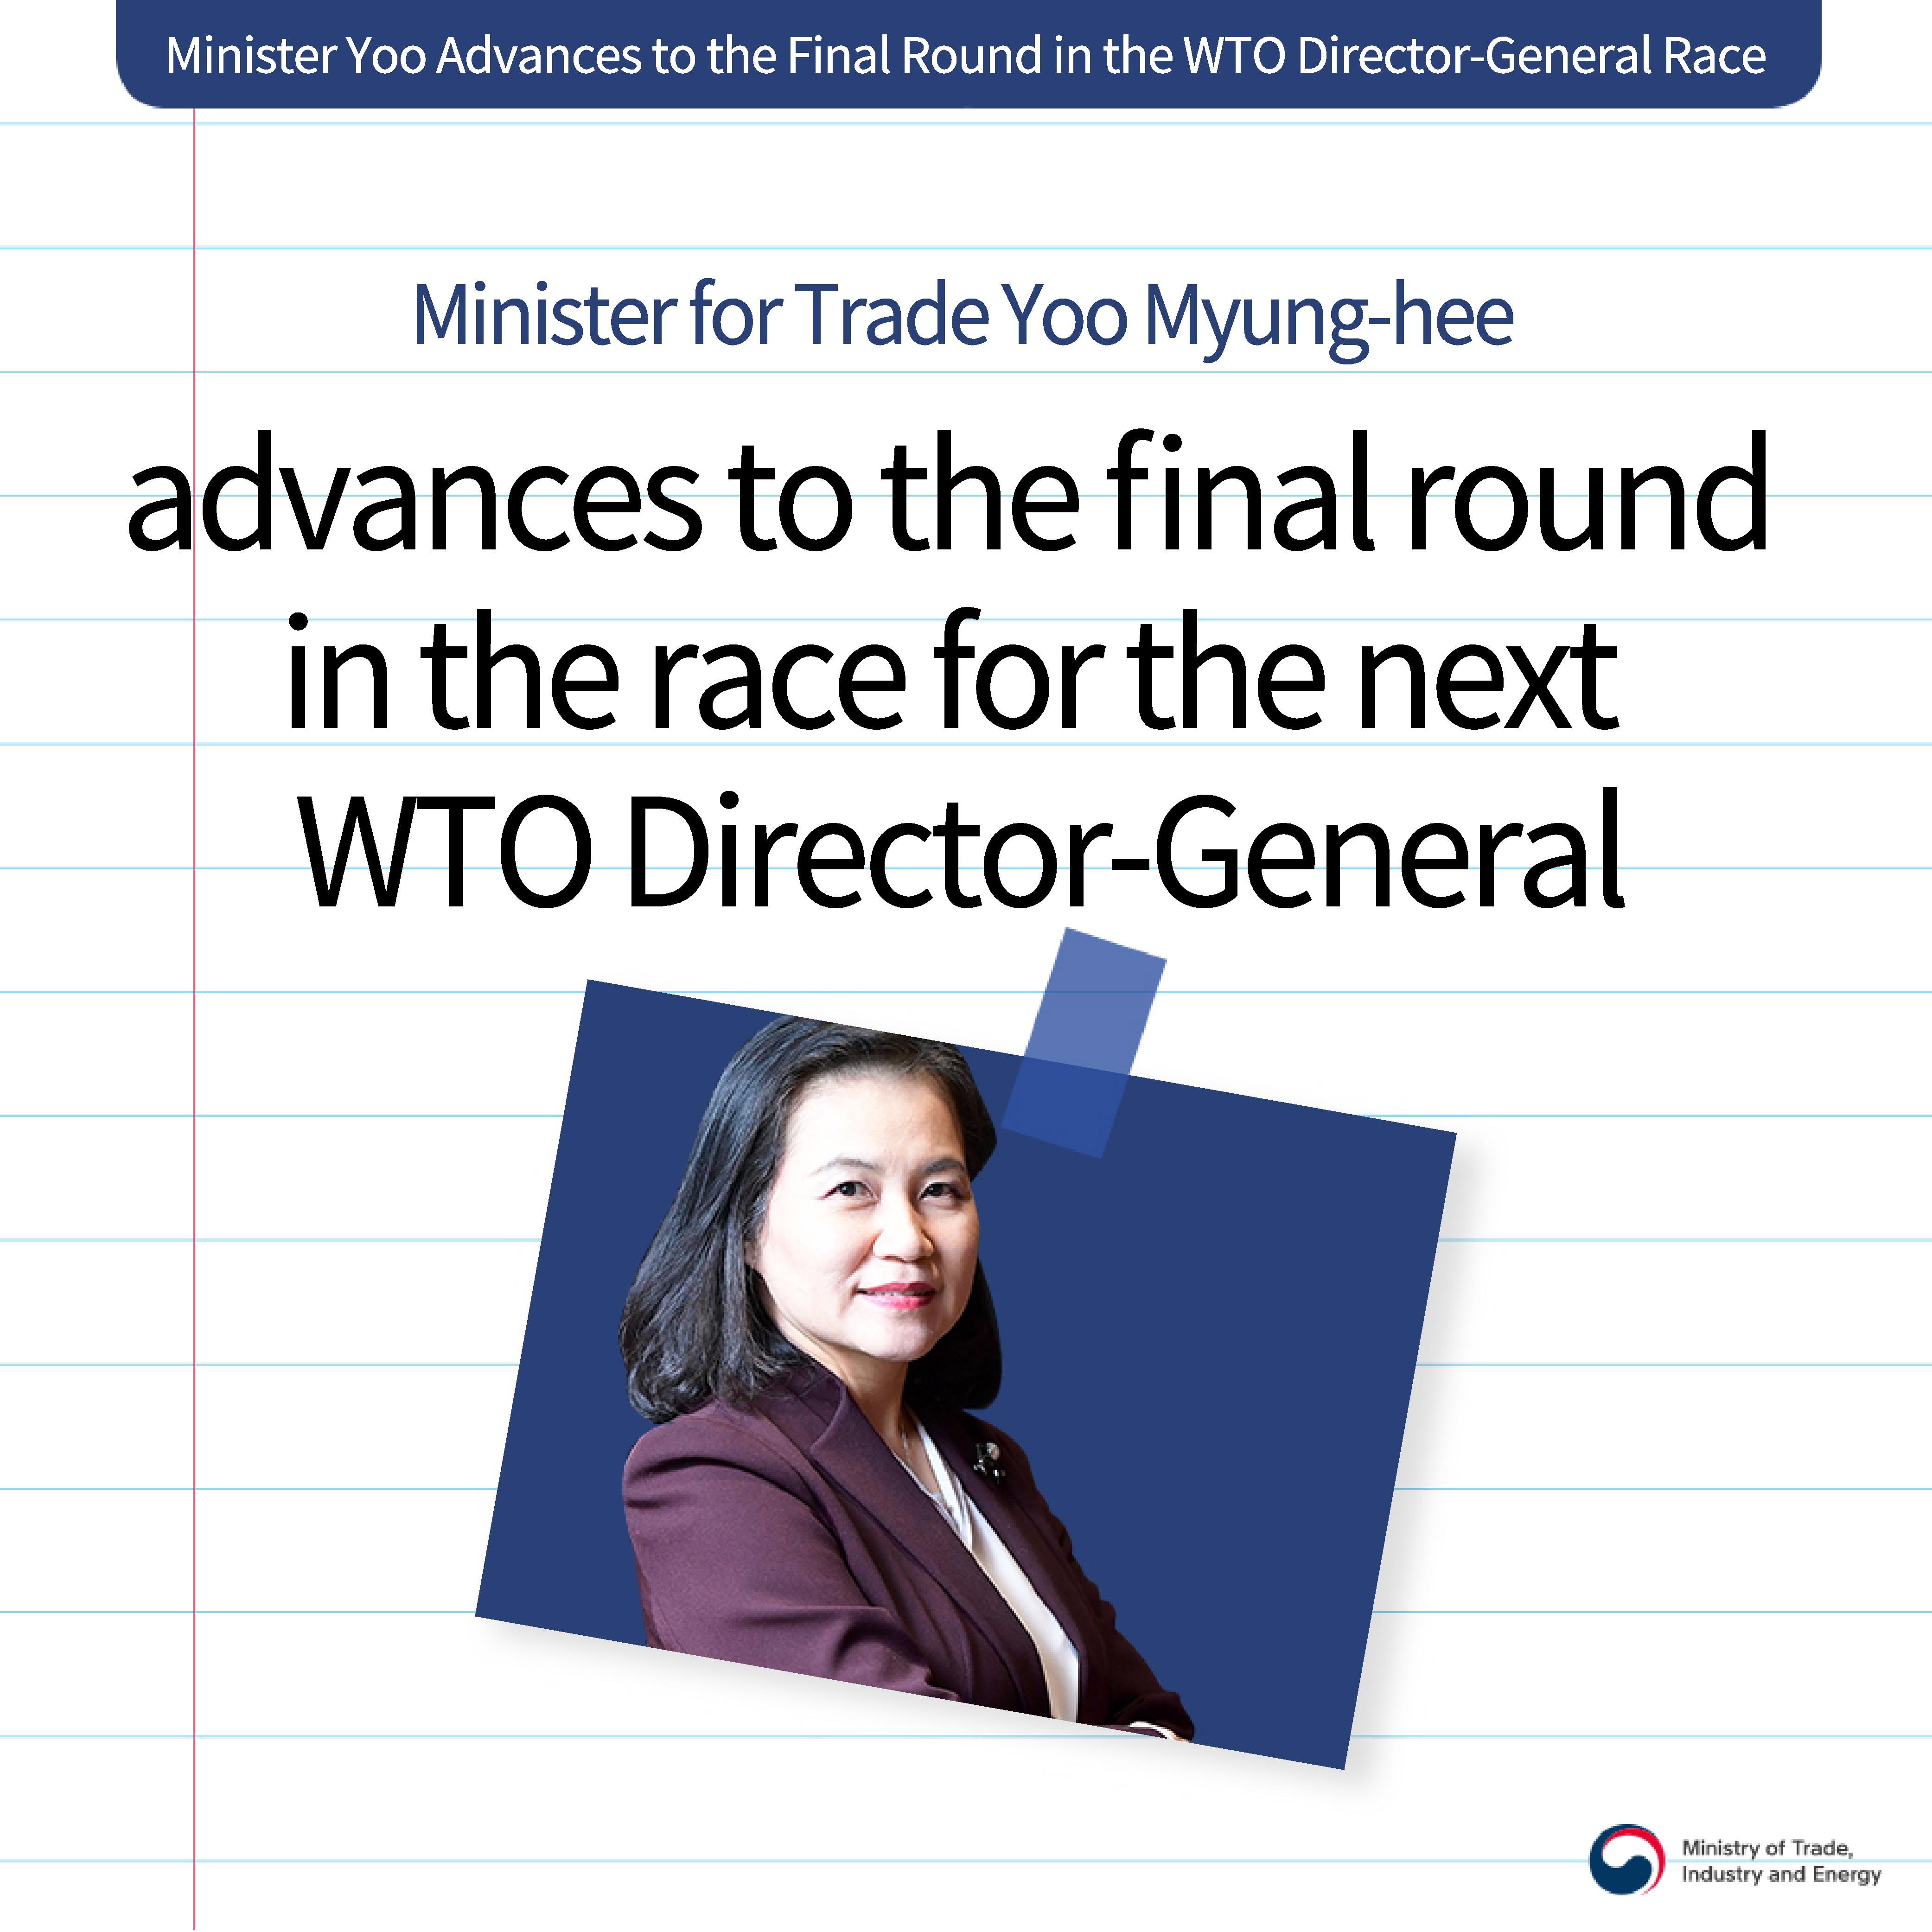 Trade Minister Yoo Myung-hee advances to the final round in the race for the next WTO DG Image 3